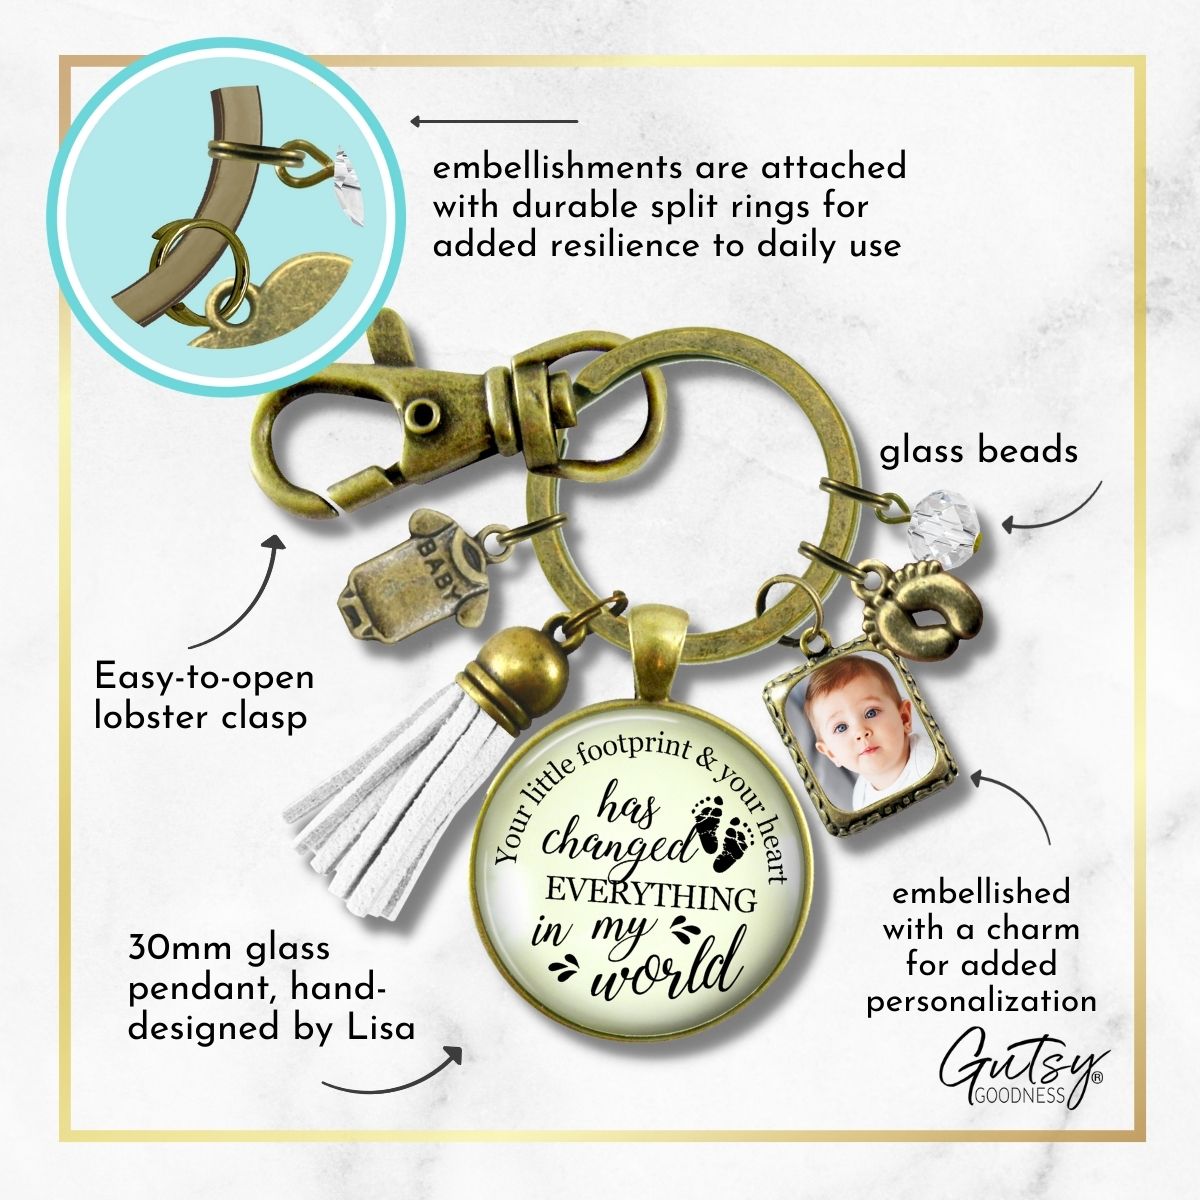 Handmade Gutsy Goodness Jewelry New Mom Keychain Your Little Footprint Gift Baby Feet, Photo Frame Charm, DIY Picture Template